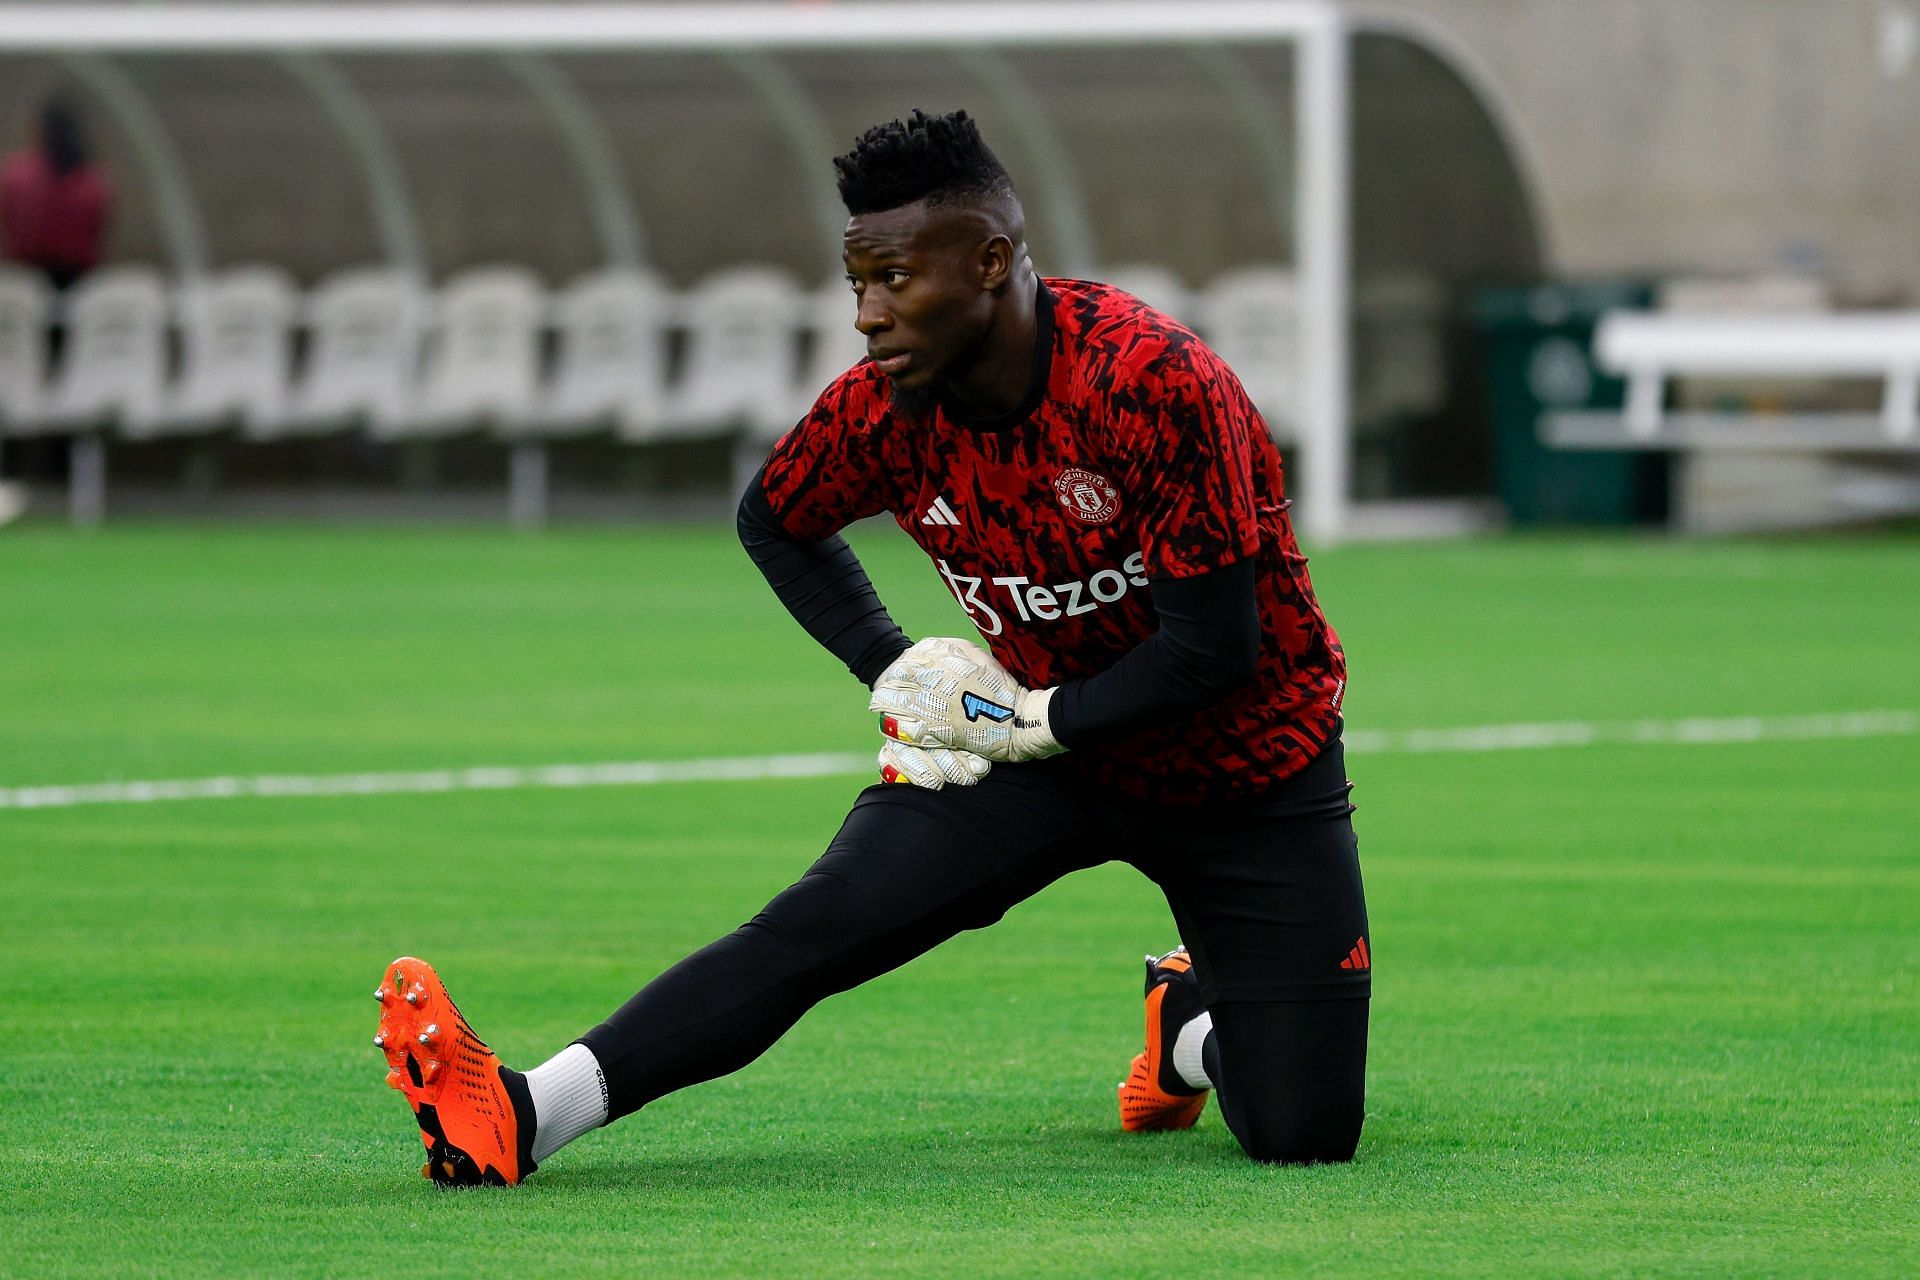 Onana is set to make his EPL debut this season, but his quality should not be in question following his displays for Inter last season